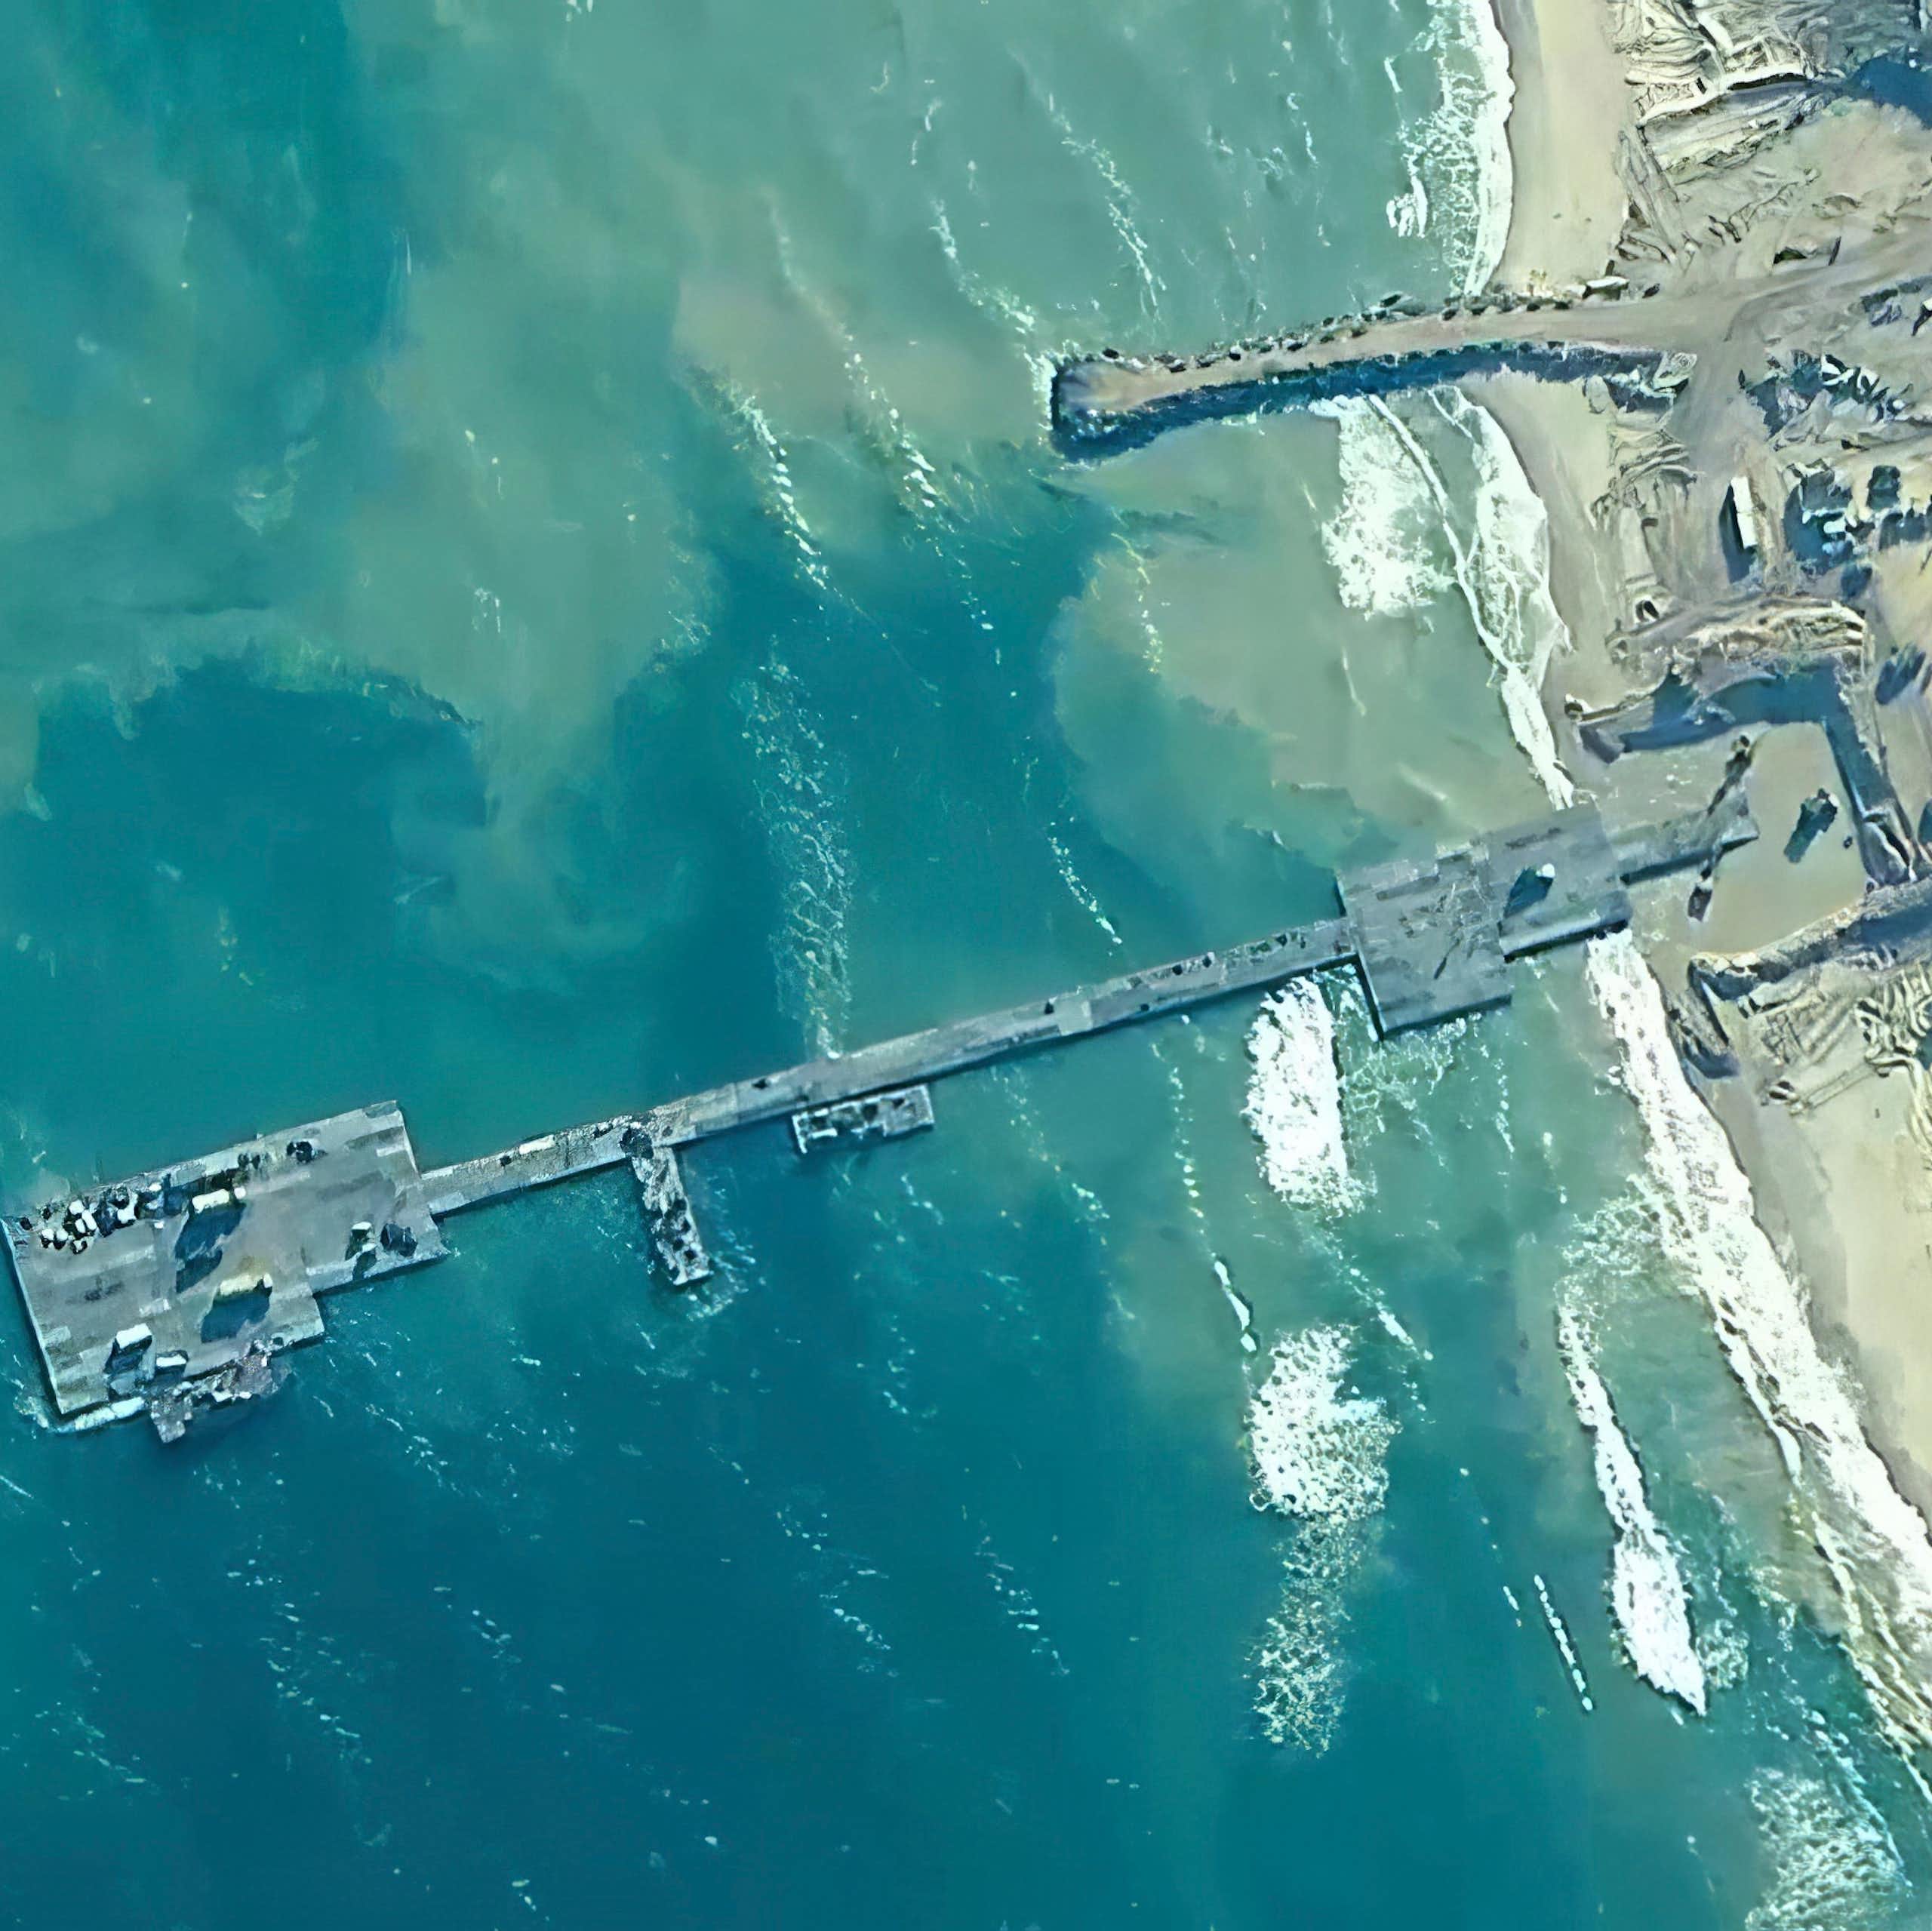 An overhead image shows a floating platform connected by a floating roadway to a beach.